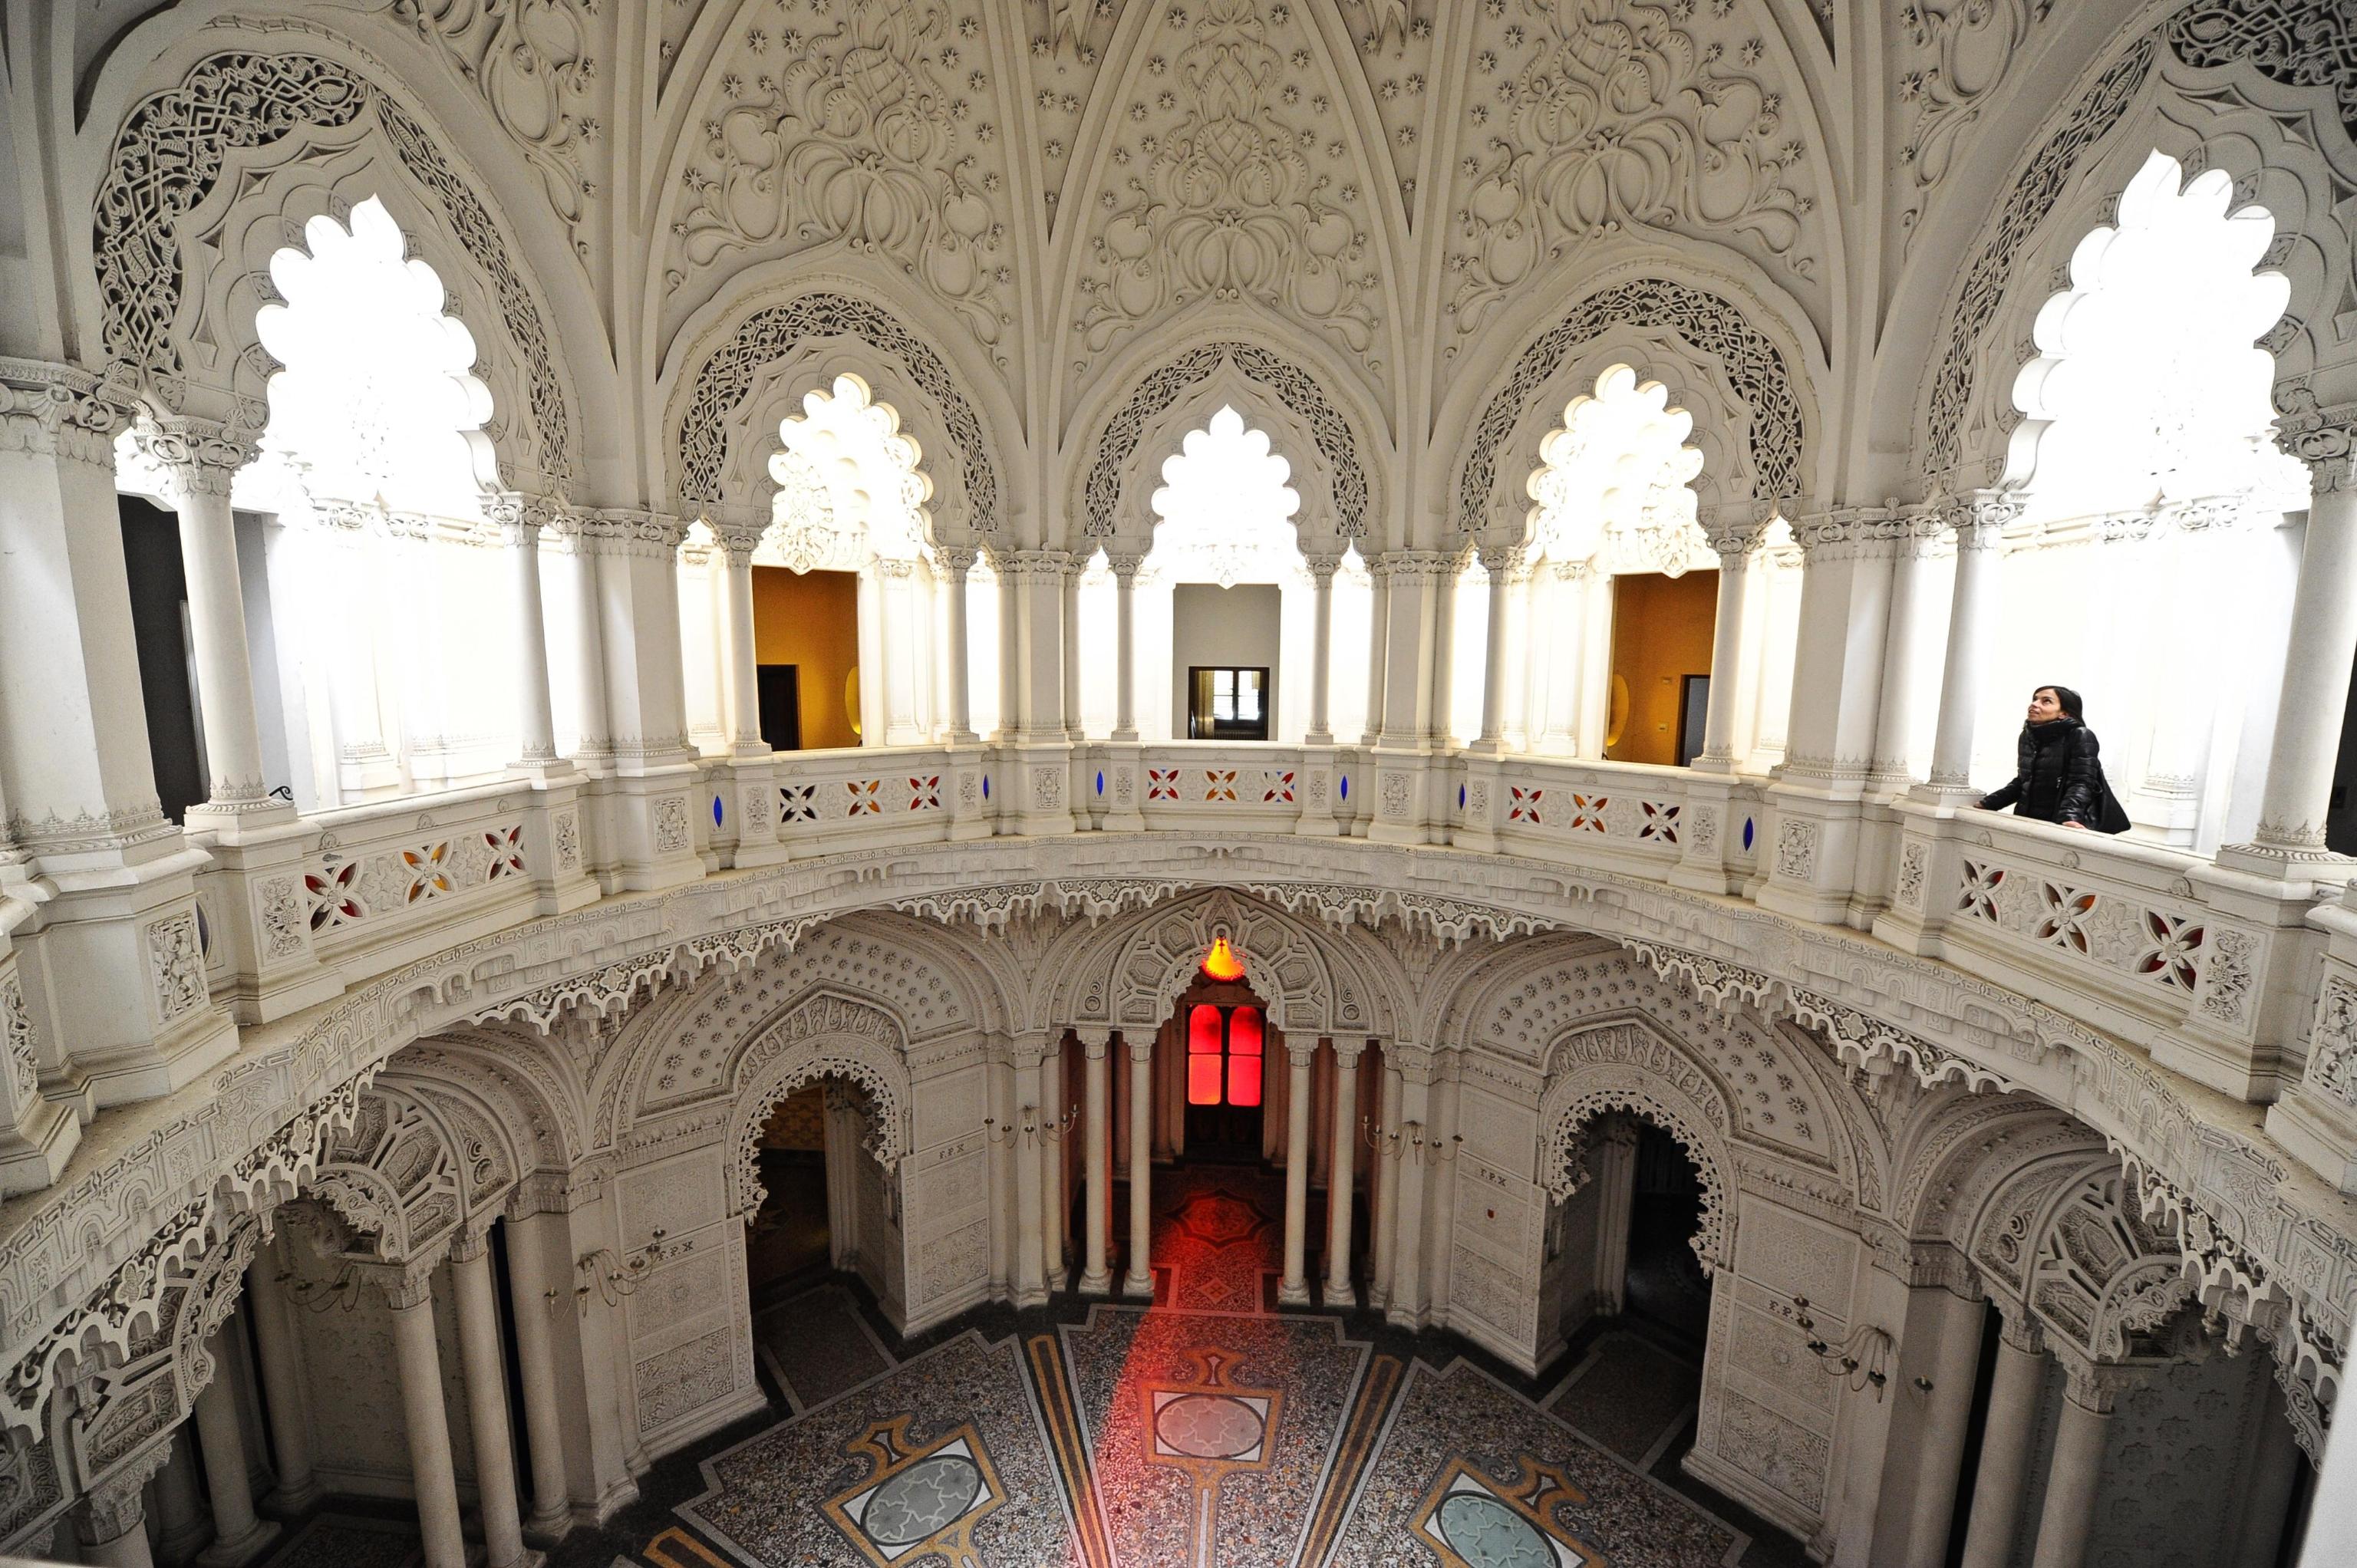 Special opening to the public of the Castle of Sammezzano, an Italian palazzo in Tuscany notable for its Moorish Revival architectural style, which was recently auctioned for failure, in Leccio (Province of Florence), Italy, 06 december 2015.
ANSA/MAURIZIO DEGL'INNOCENTI